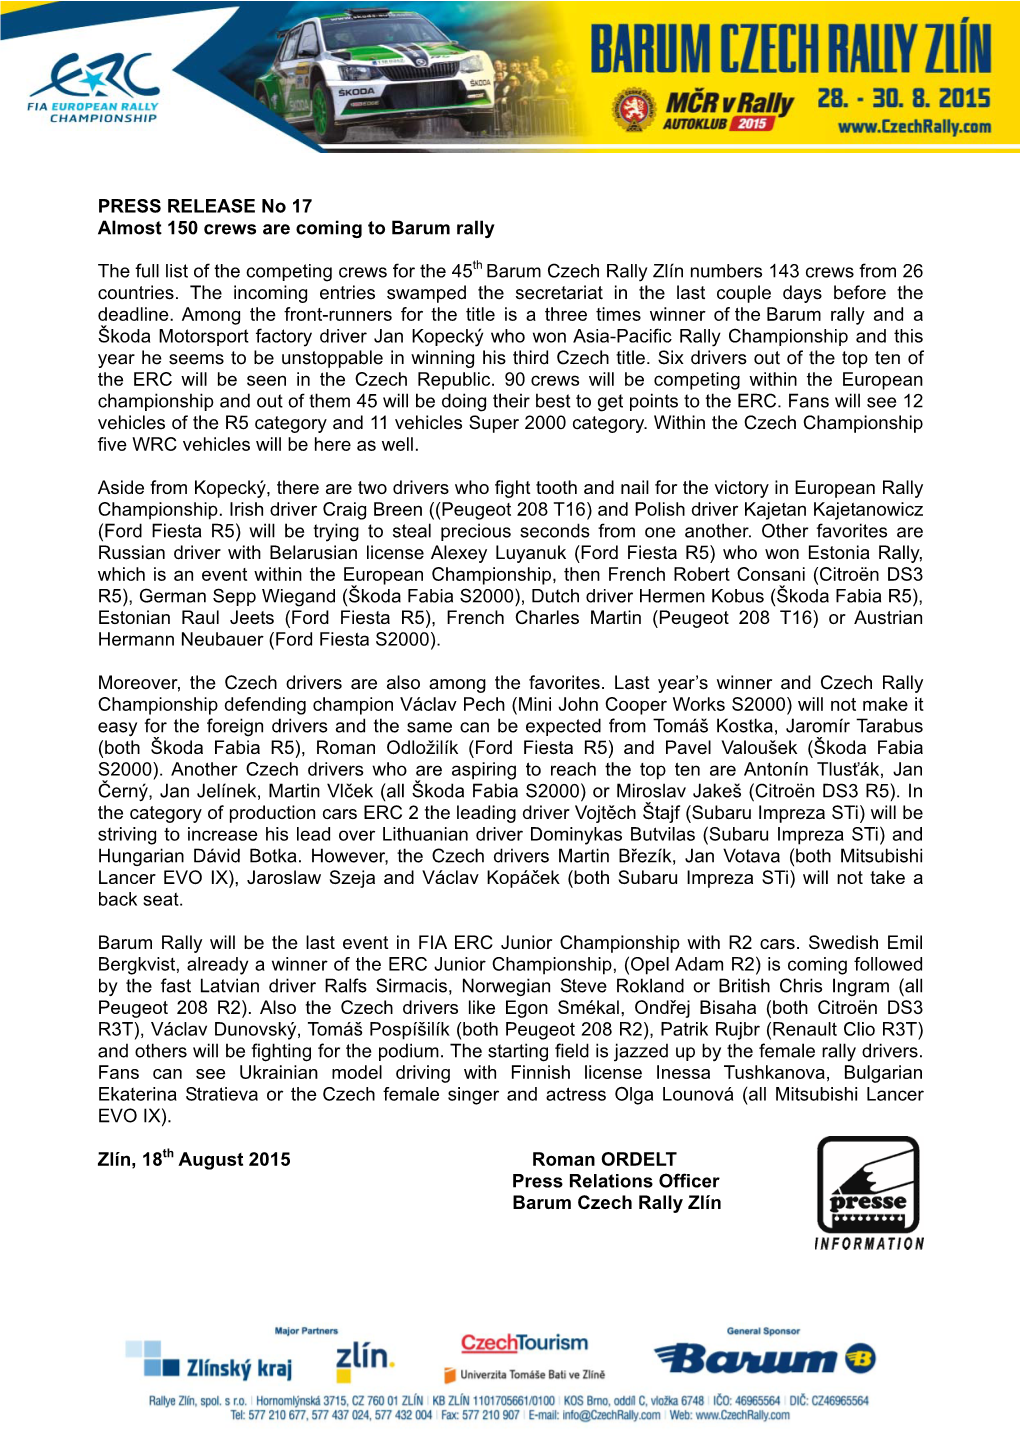 PRESS RELEASE No 17 Almost 150 Crews Are Coming to Barum Rally